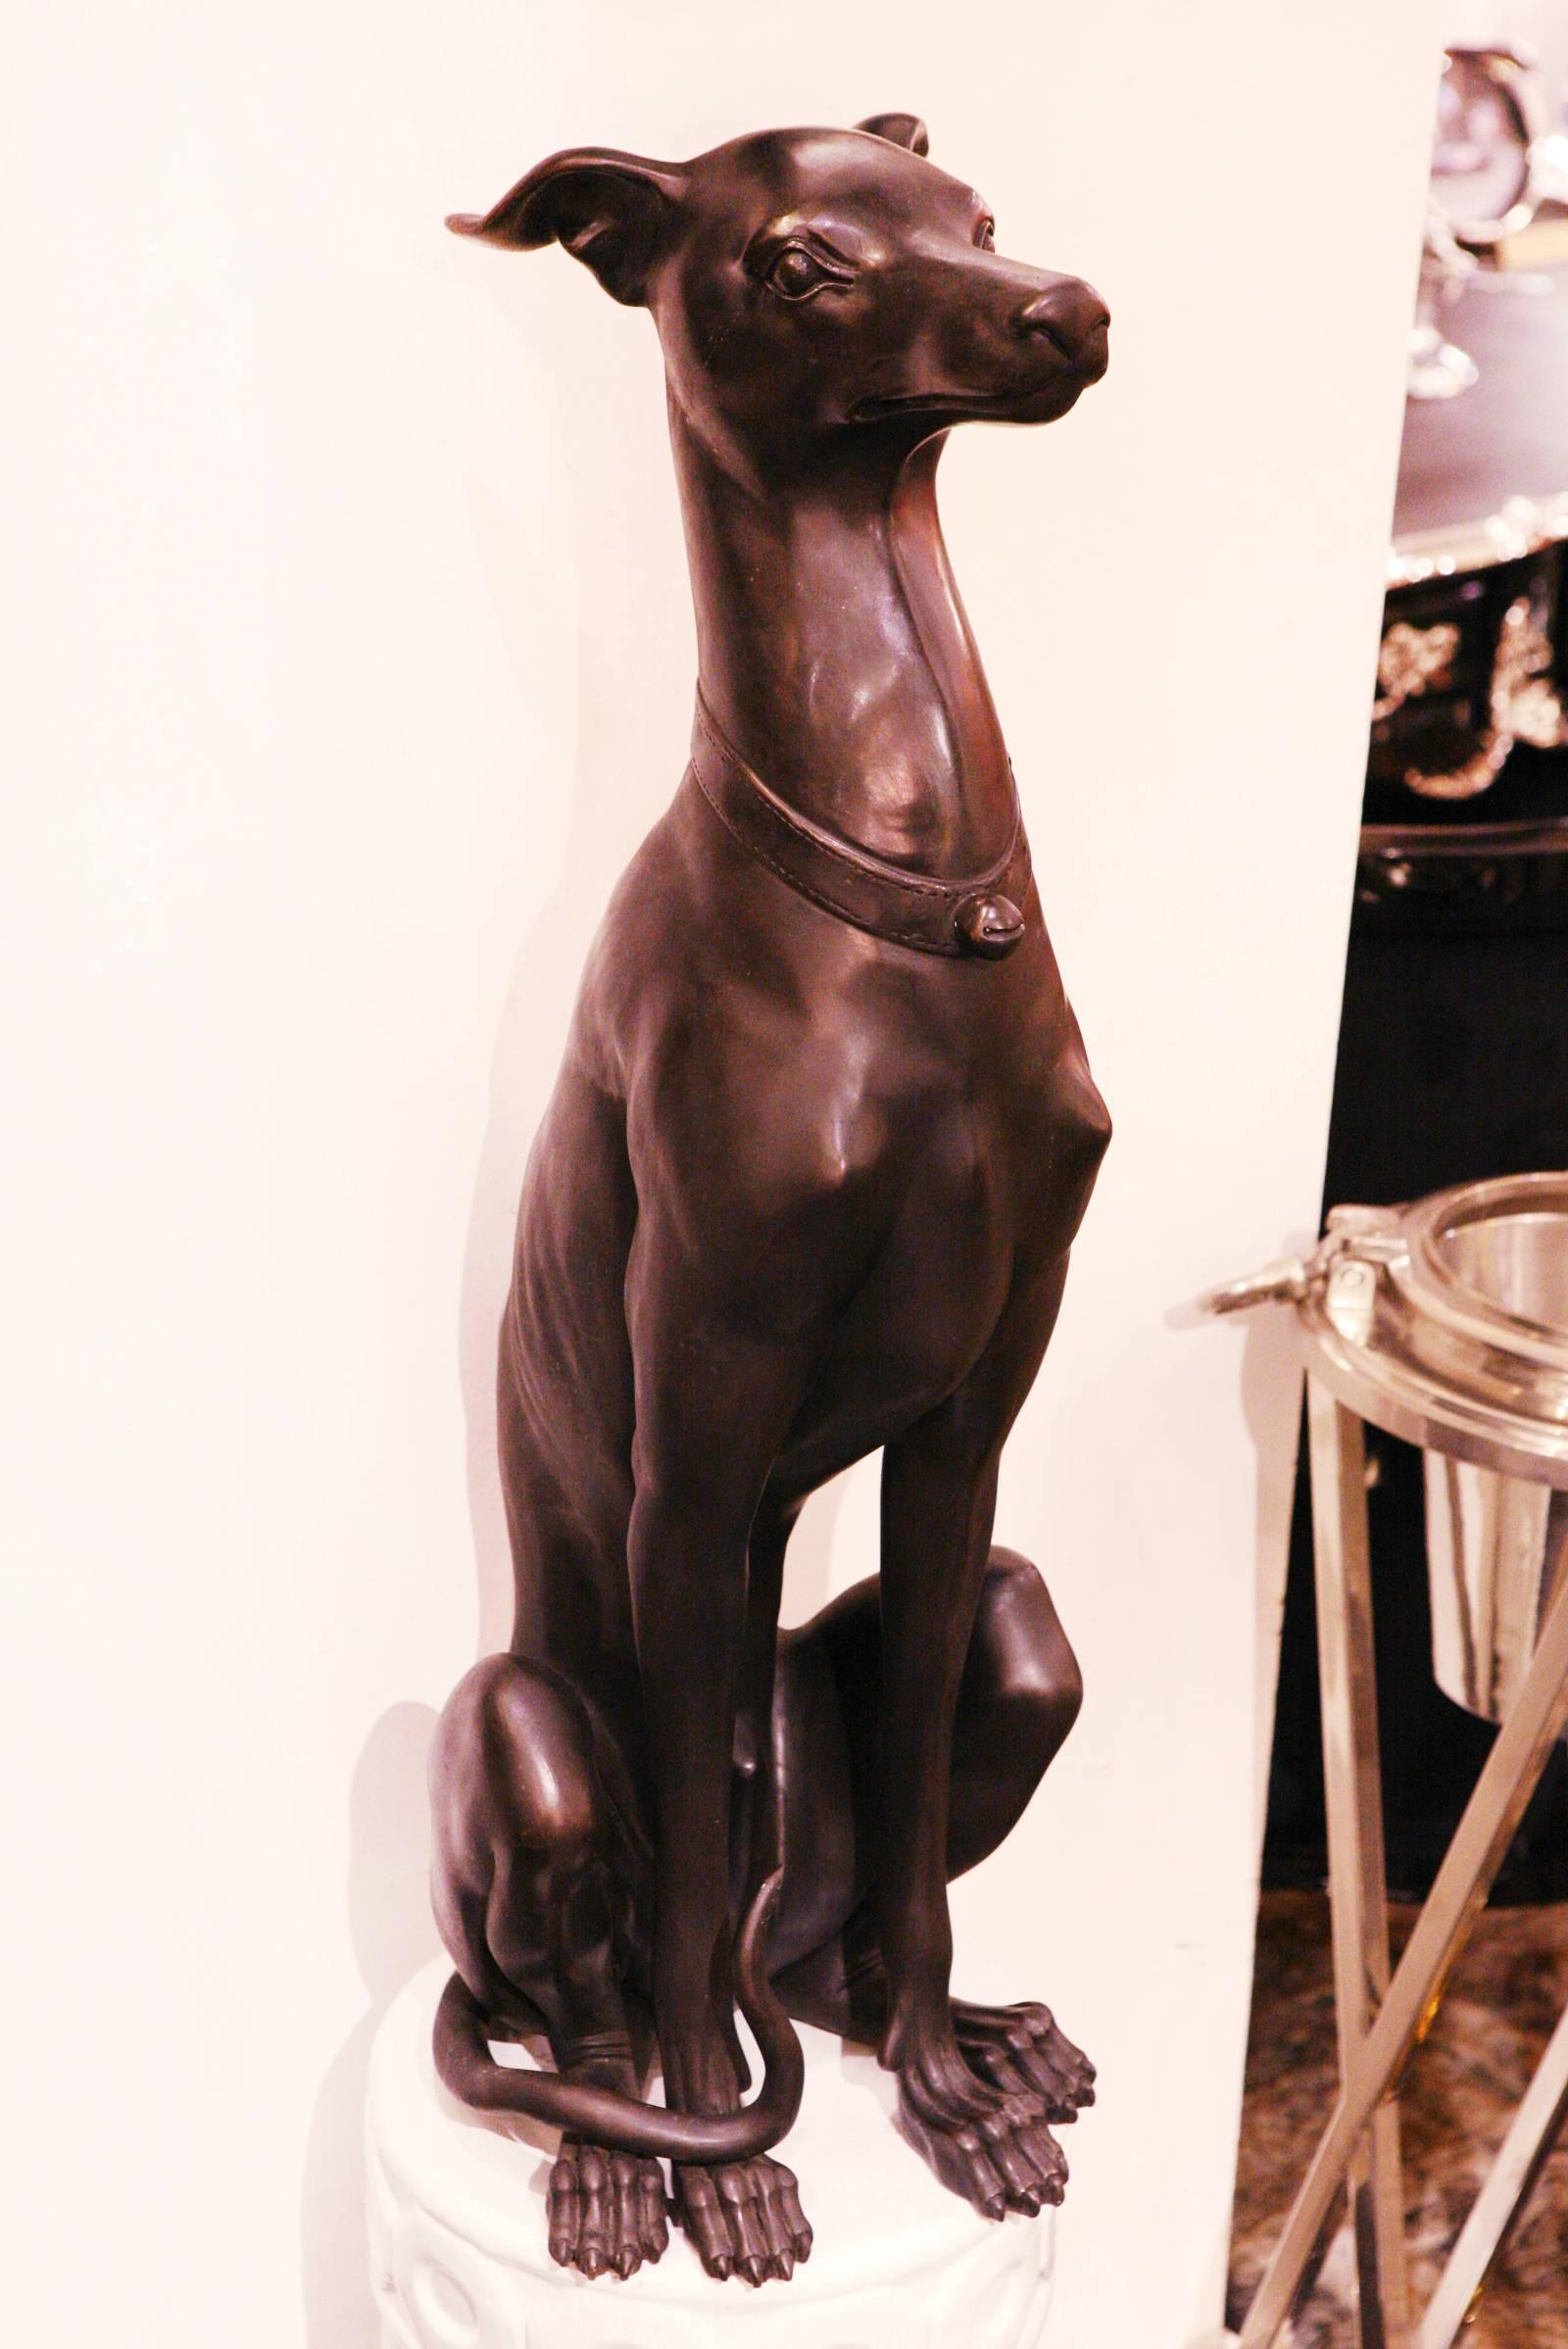 Sculpture Greyhound set of two in solid bronze.
Each greyhound is different, not similar.
Measure: A/ L 30 x D 34 x H 89cm.
B/ L 30 x D 34 x H 88cm.
 
 